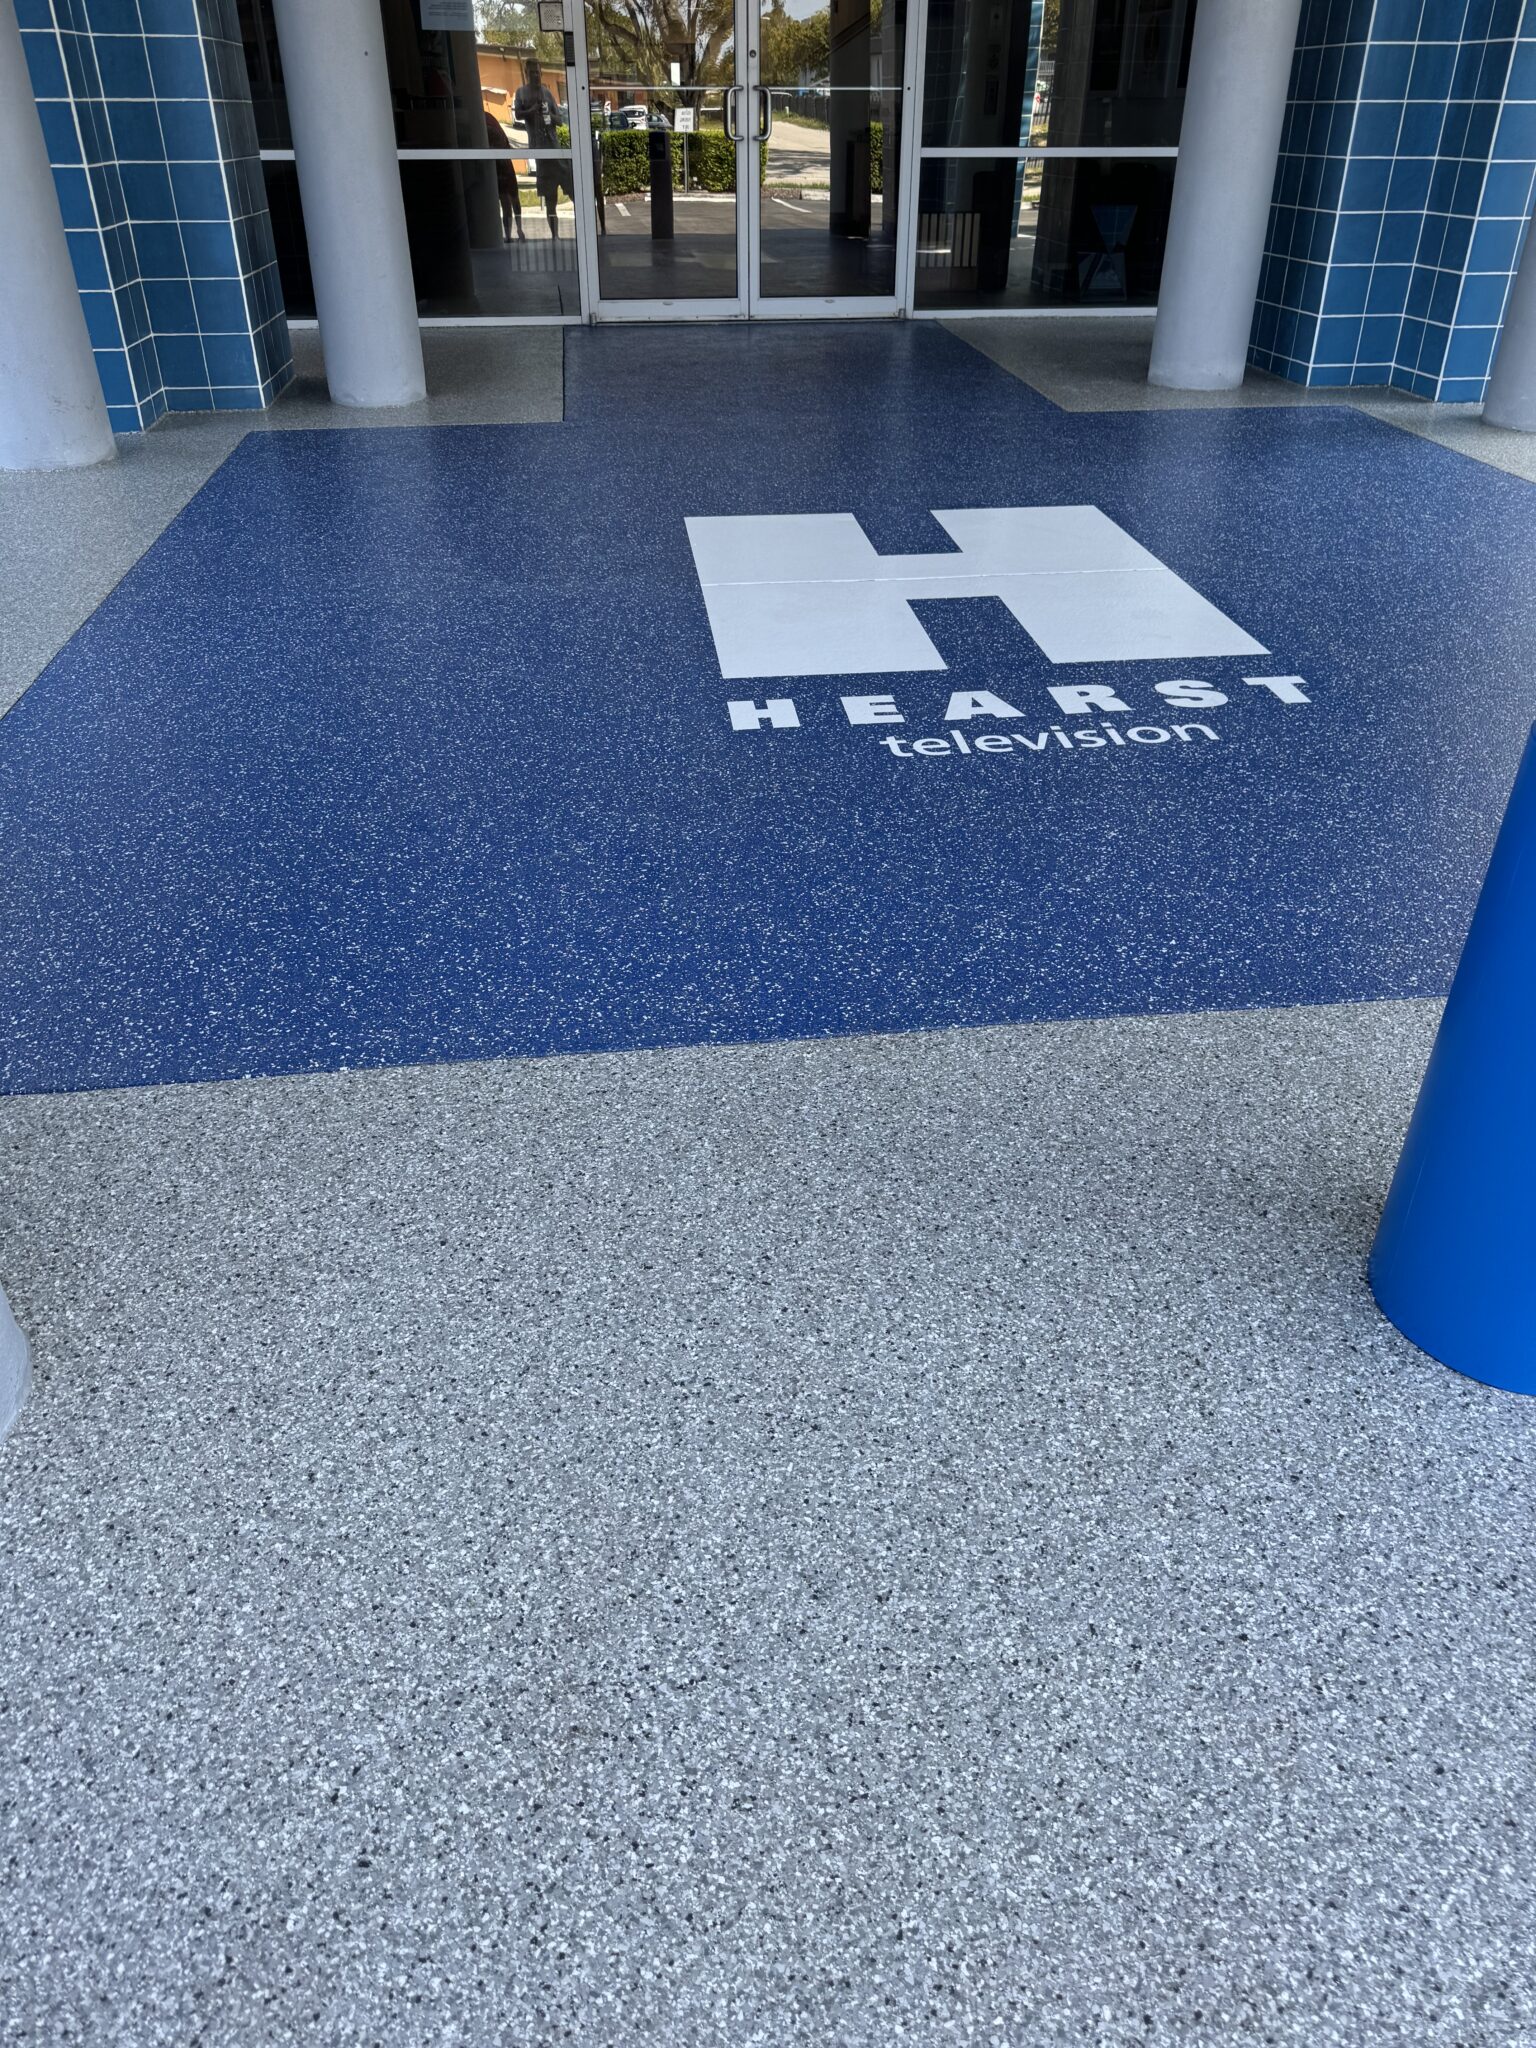 The image shows a blue-speckled floor with a large white "H" logo and "Hearst Television" text, in front of glass doors framed by blue tiles.